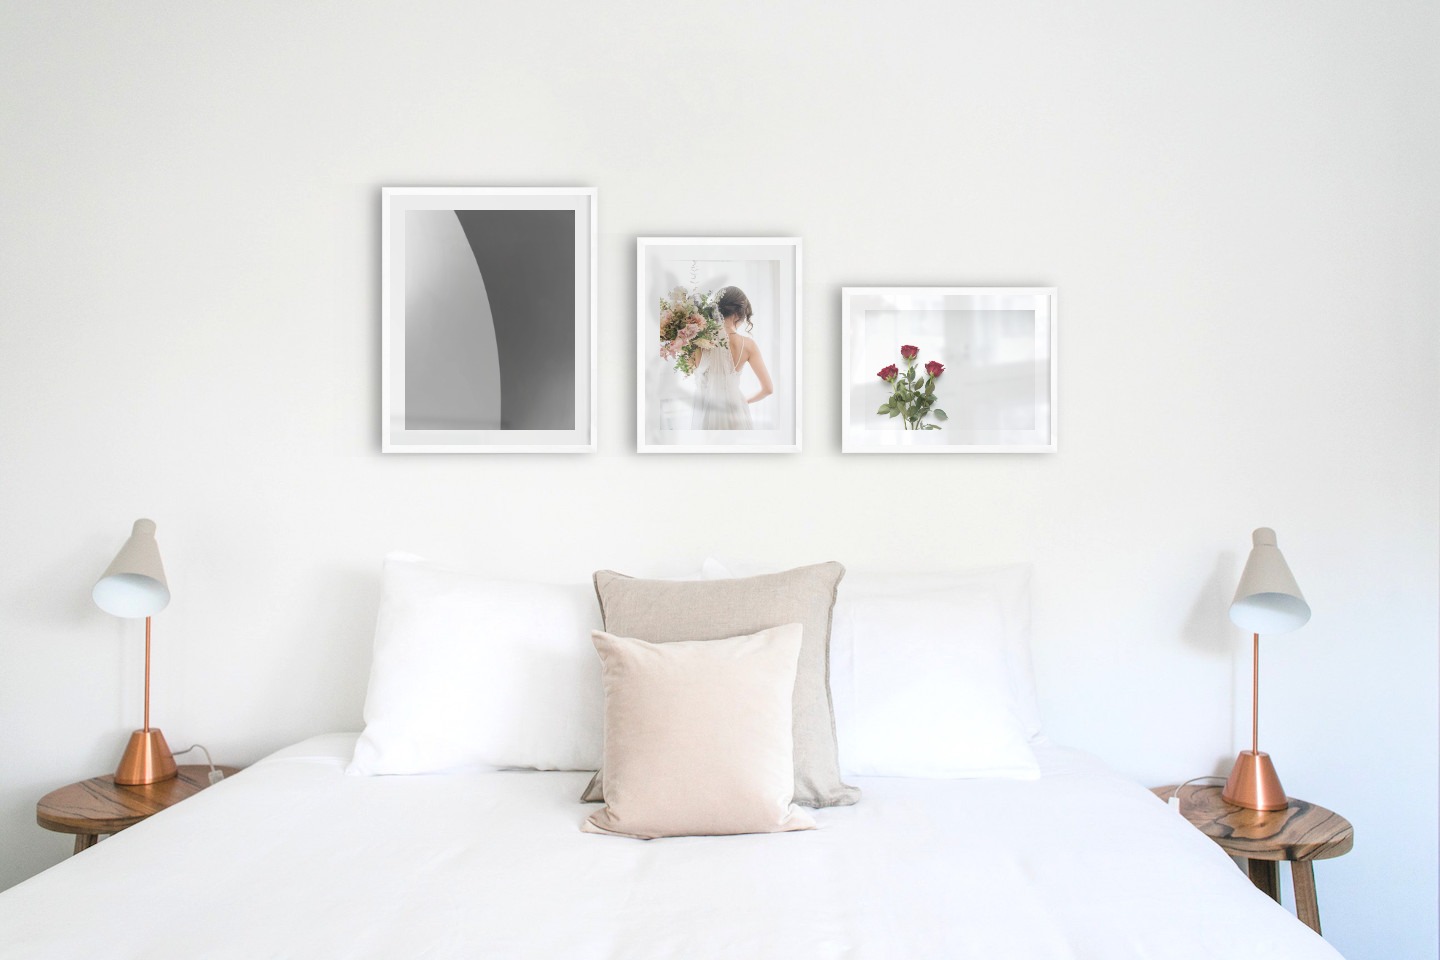 Gallery wall with picture frames in white in sizes 40x50 and 30x40 with prints "Line", "Bride and flowers" and "Red roses"